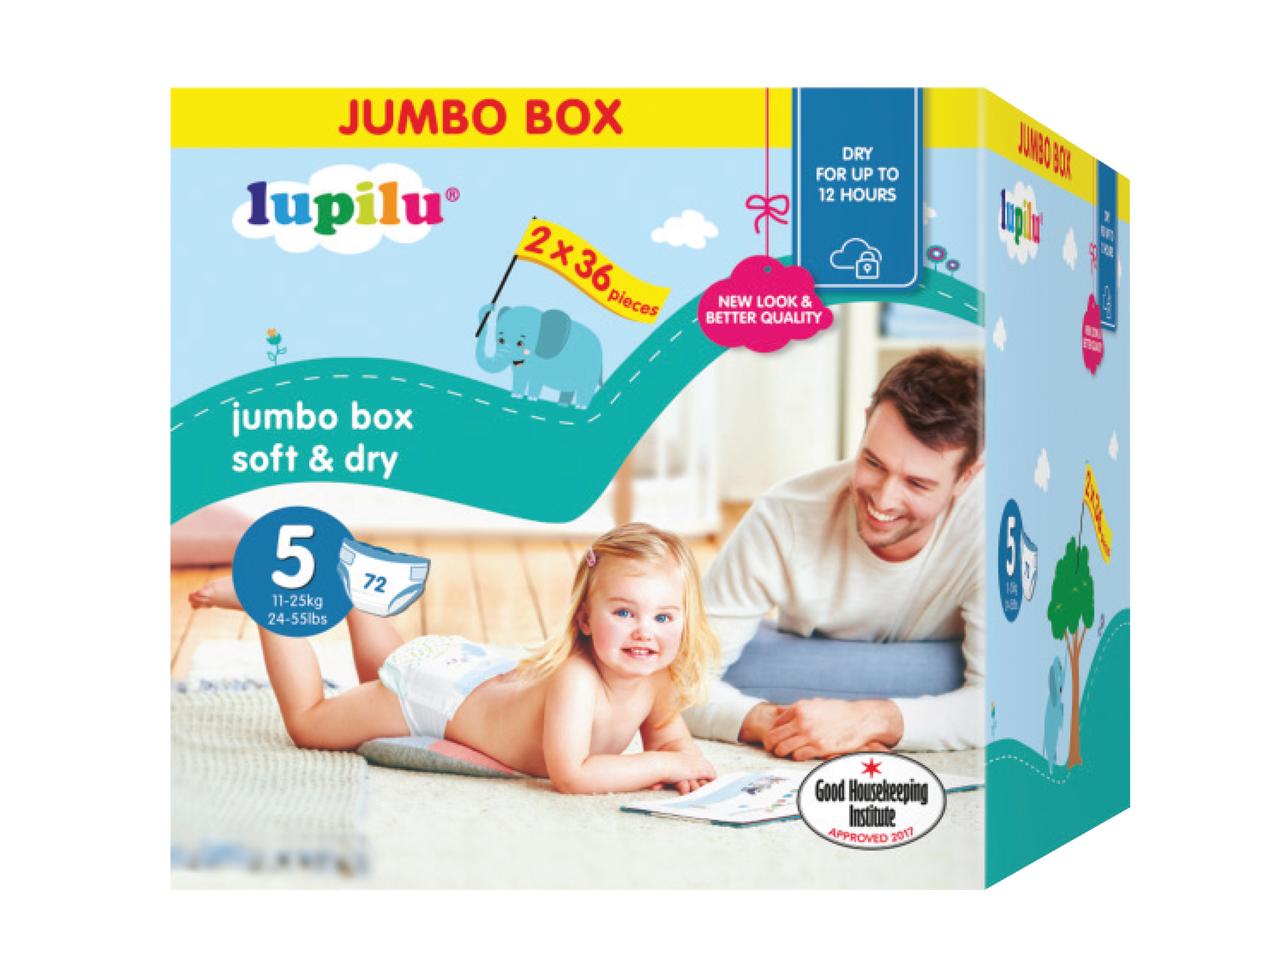 lidl nappies size 5